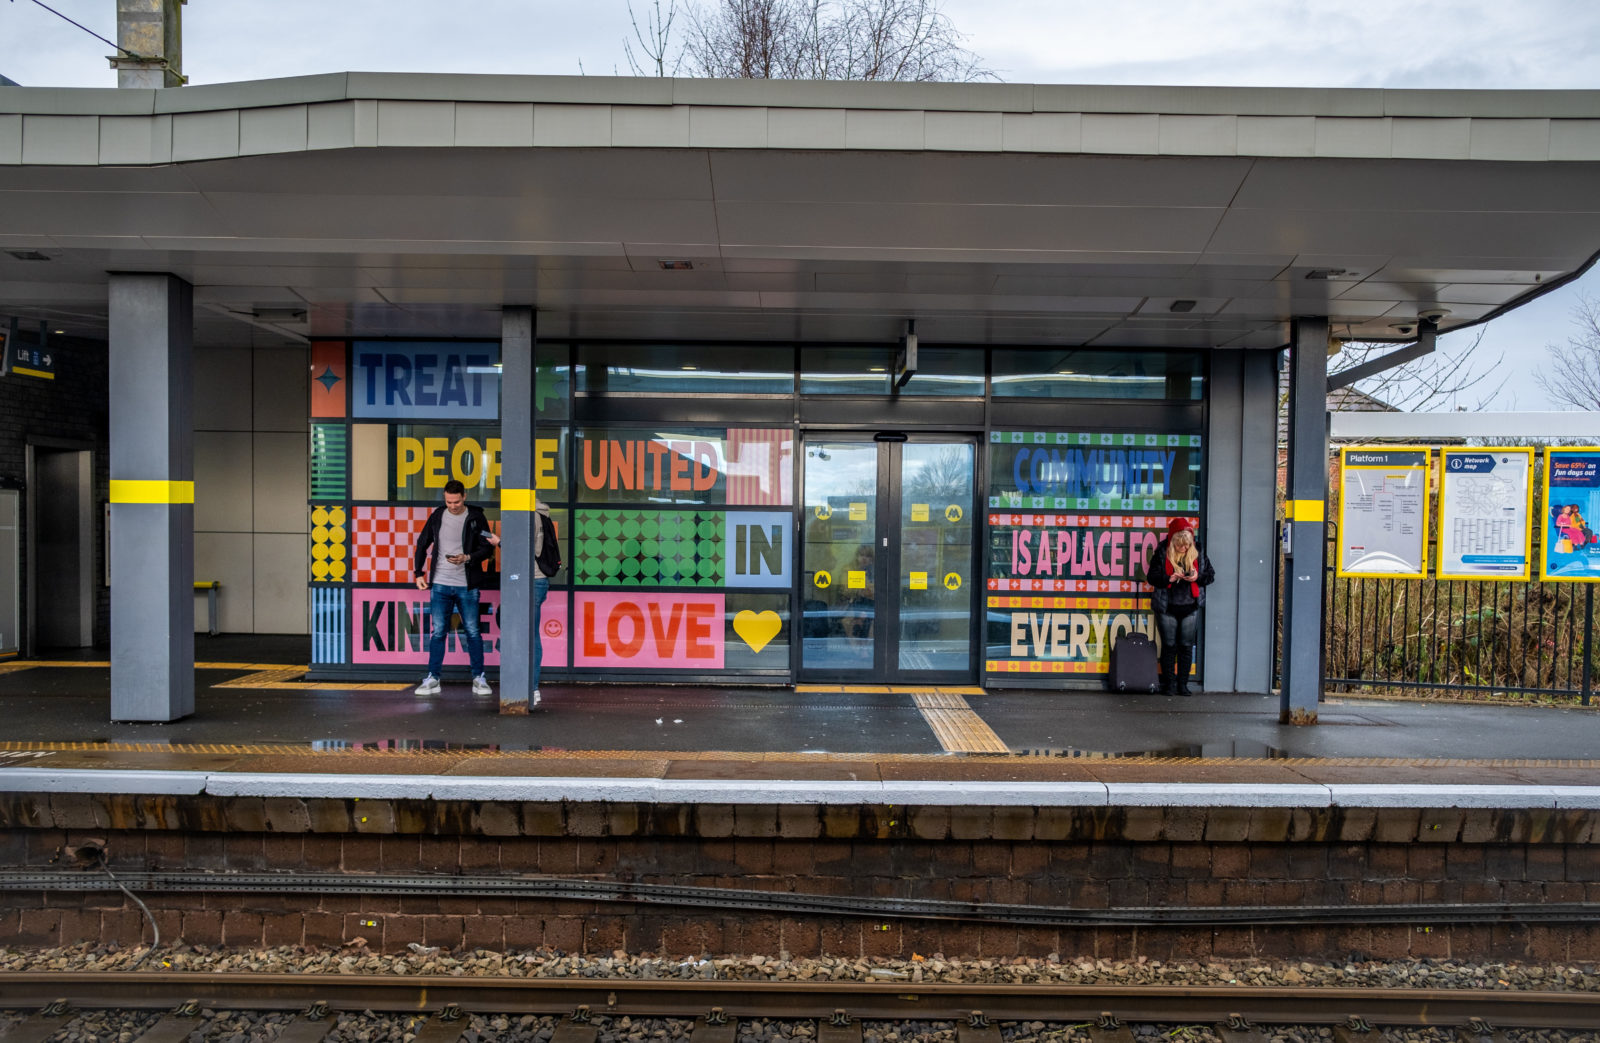 The window installation is photographed from the opposite platform, 3 people stand in front of it waiting for a train.